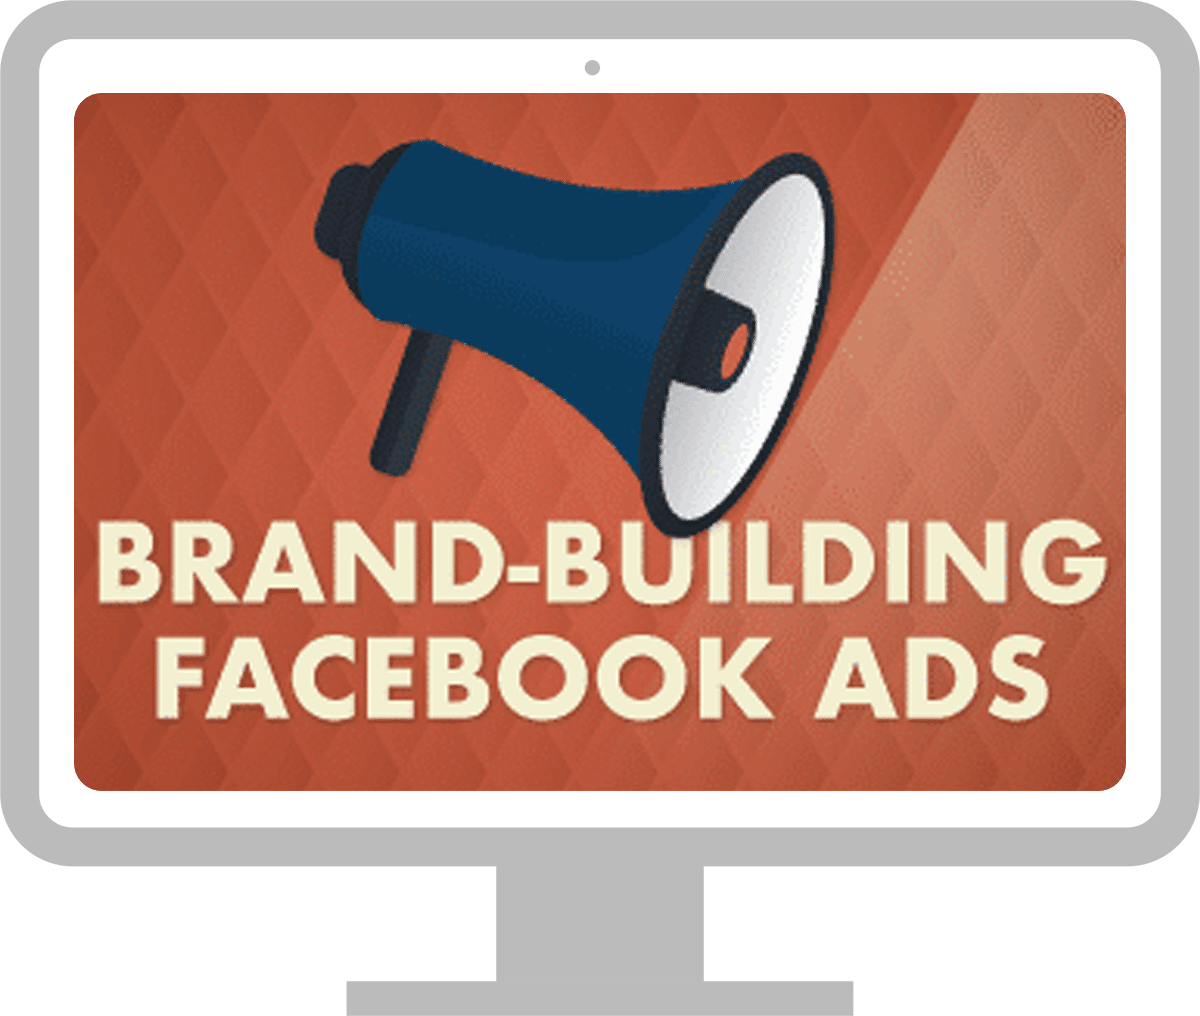 Desktop Monitor Graphic with Megaphone Promoting Facebook Ads